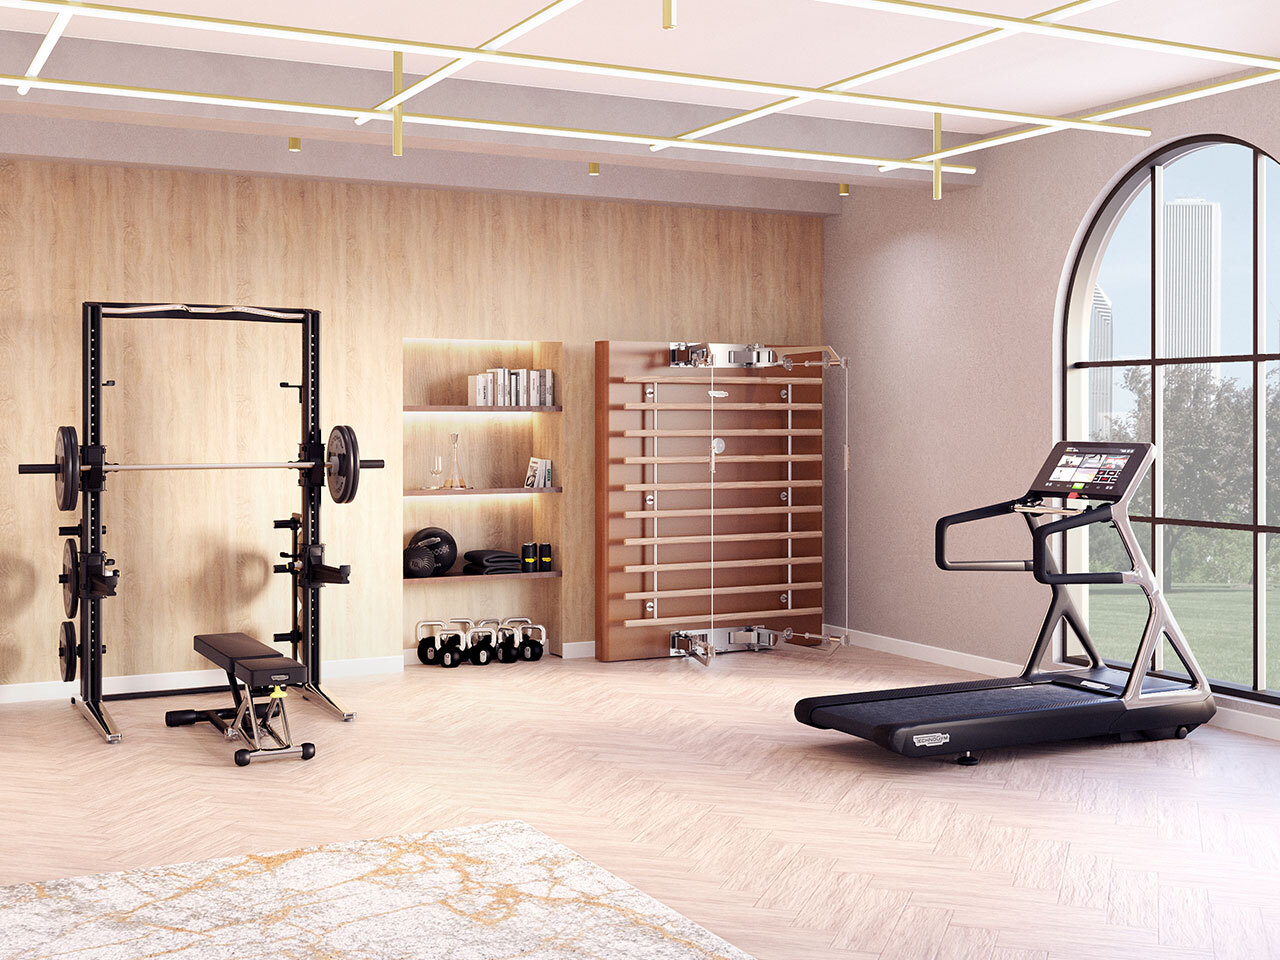 Workout Luxe: The Best Luxury Home Gym Equipment - Ape to Gentleman